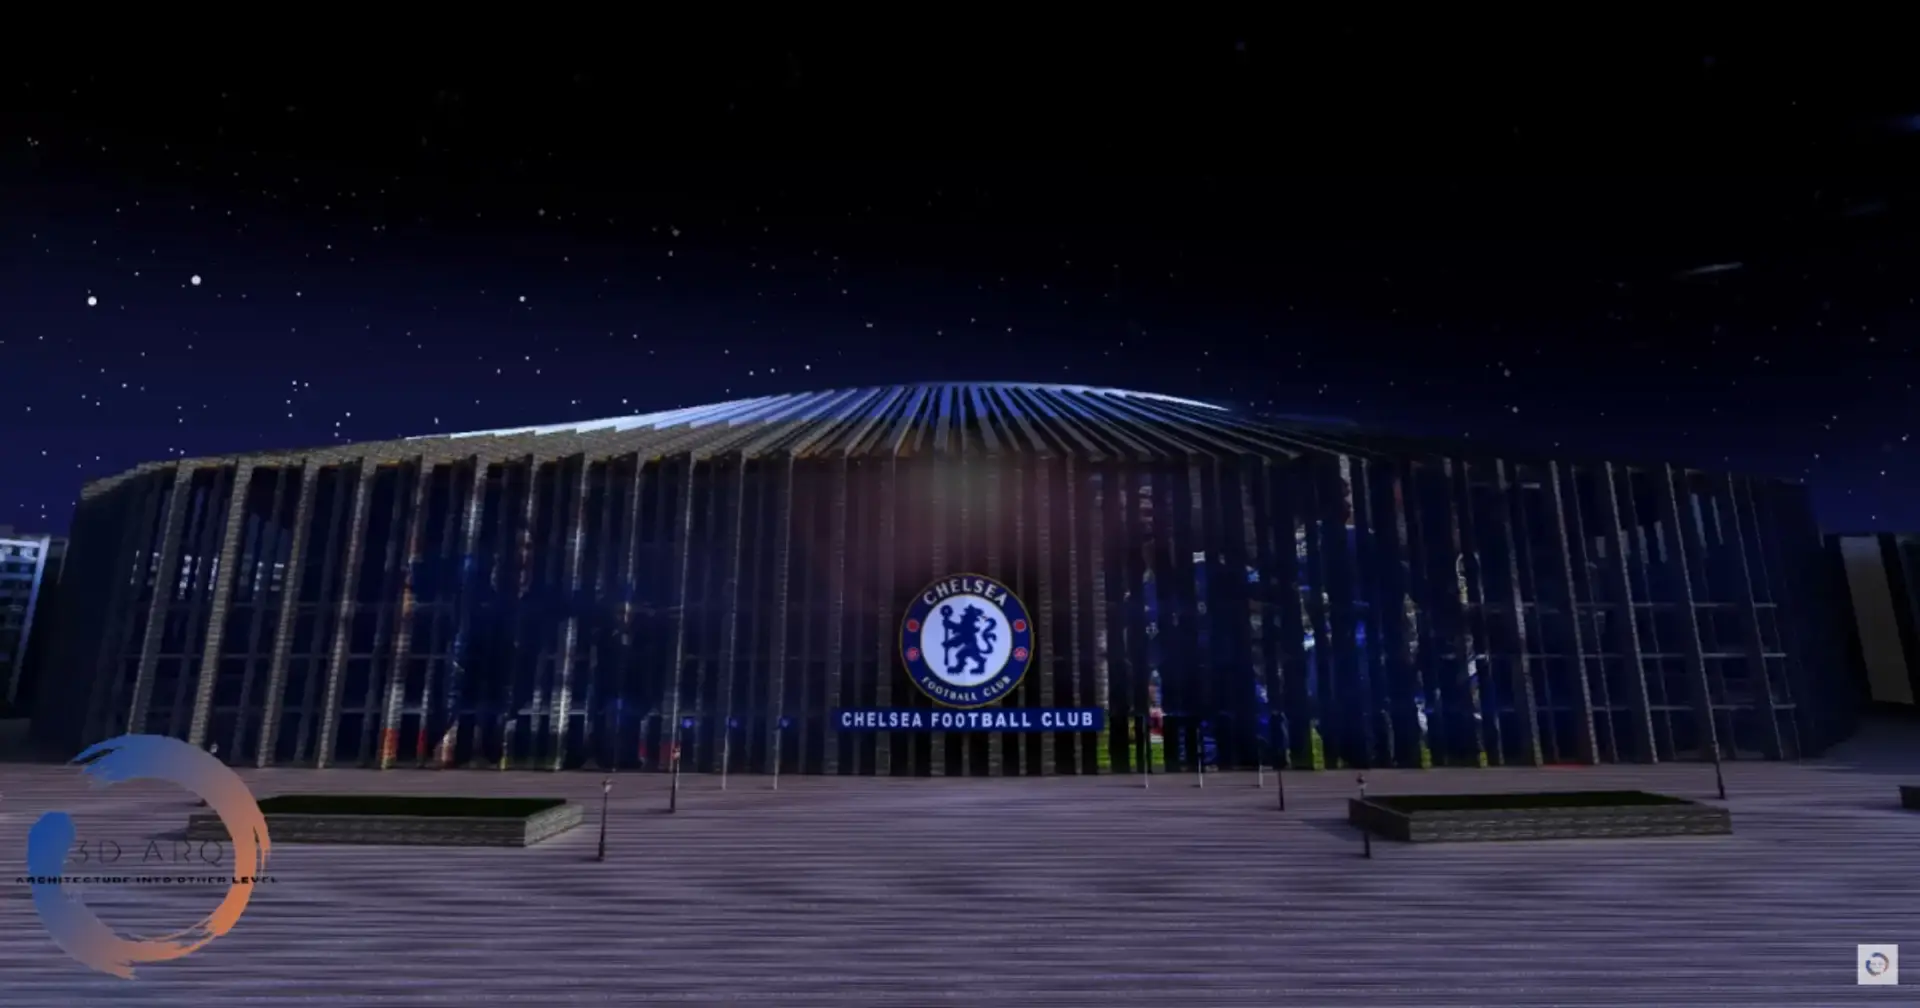 3D artists imagine how Chelsea's new stadium could look like